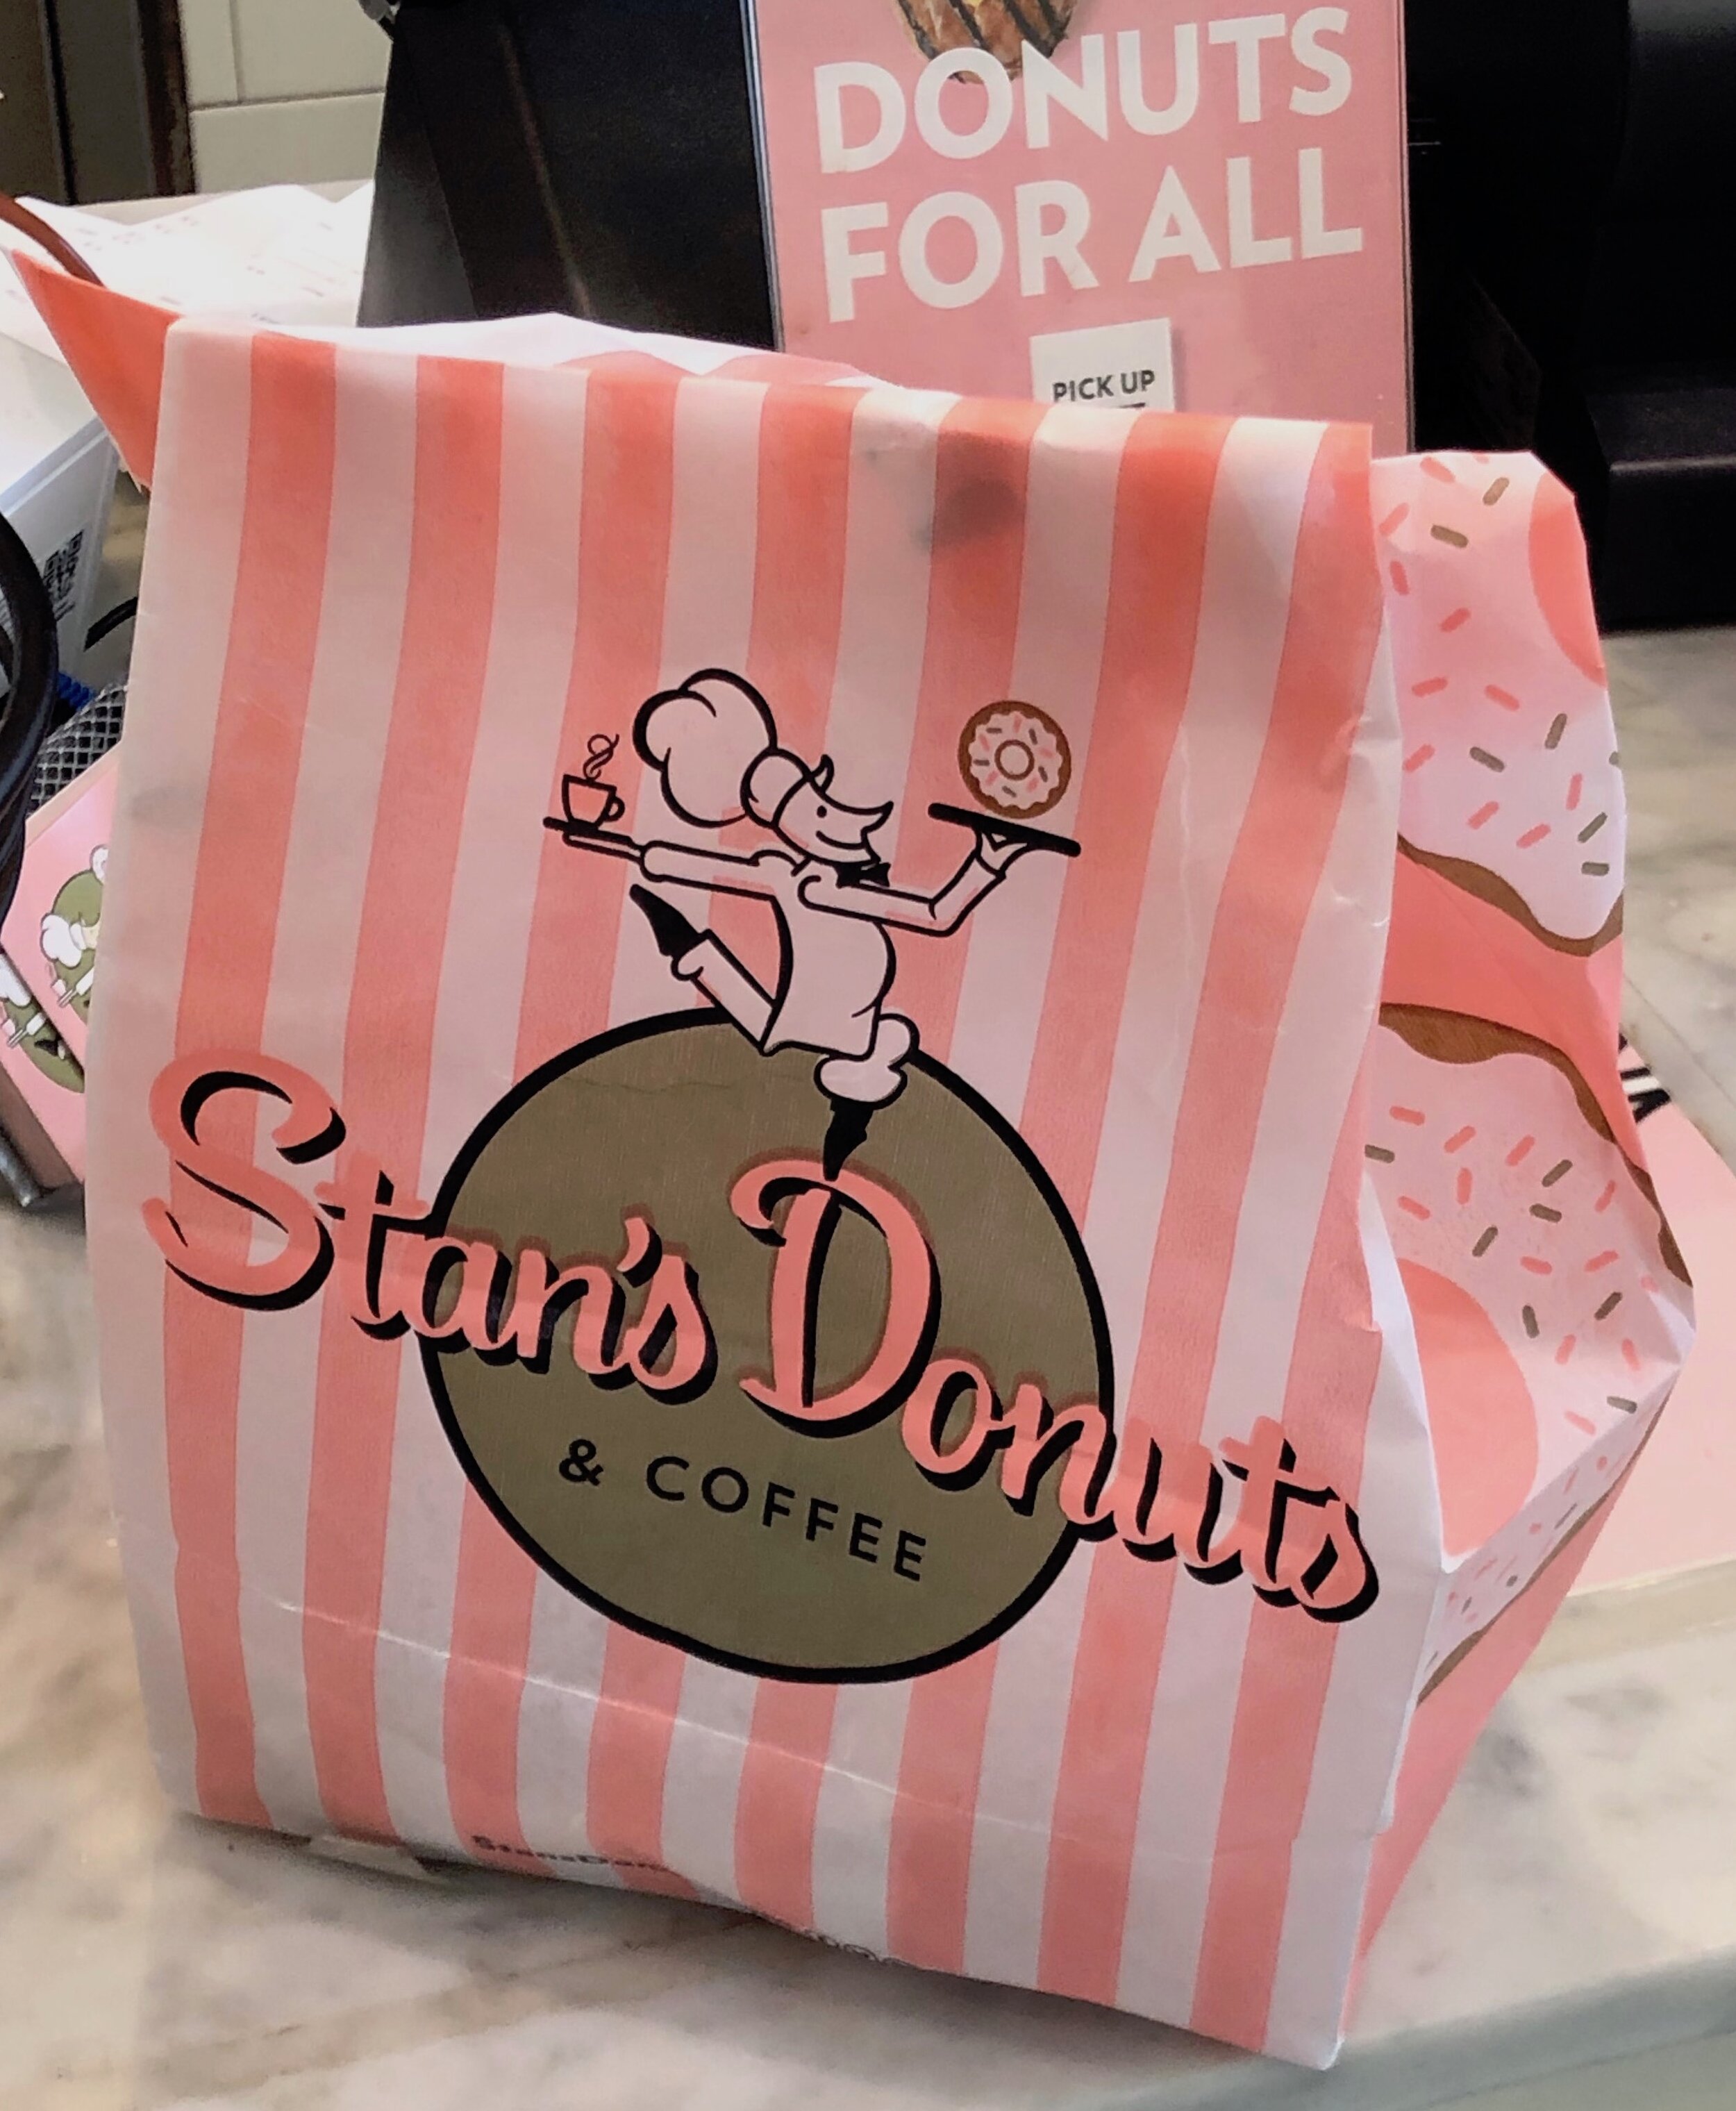 Stans_Donuts.jpg